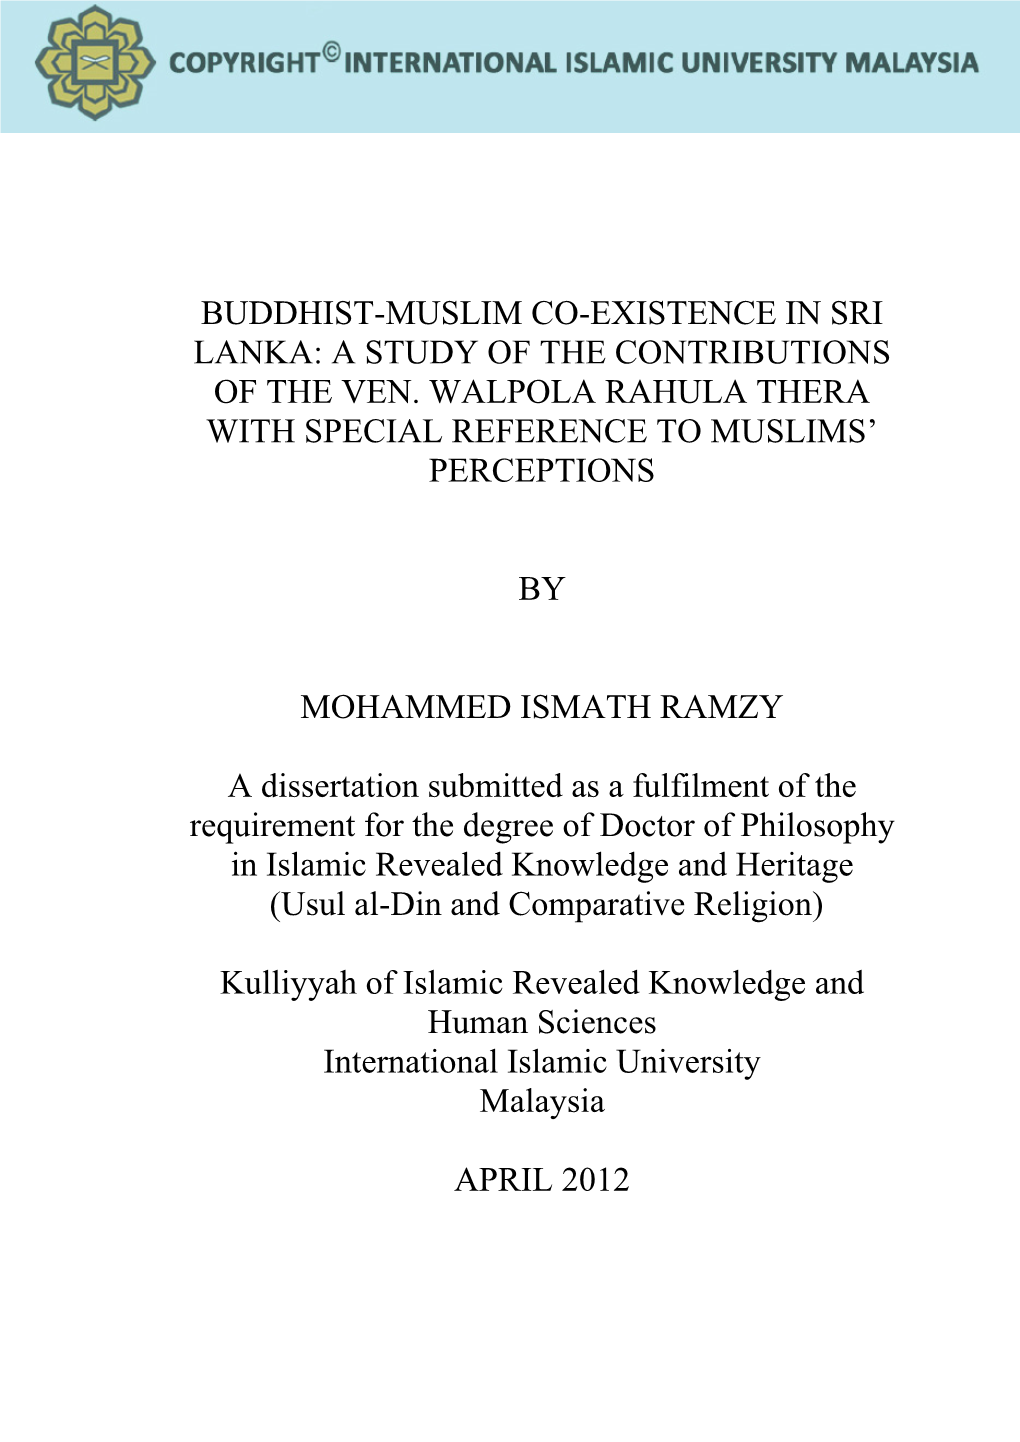 Buddhist-Muslim Co-Existence in Sri Lanka: a Study of the Contributions of the Ven